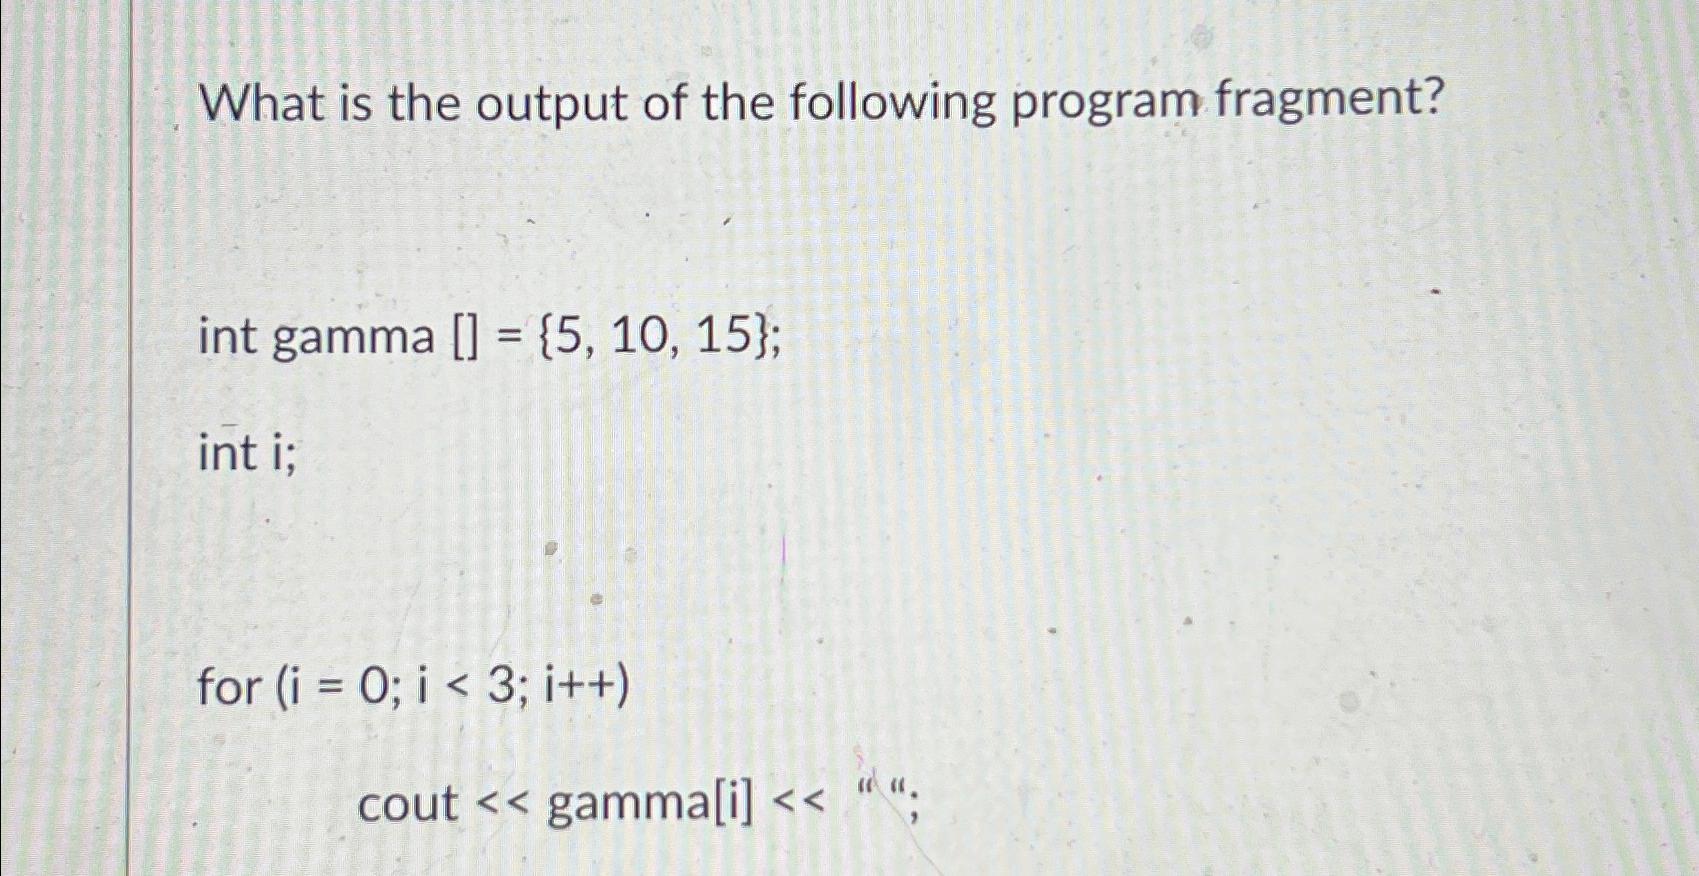 What is the output of the following program fragment? int gamma [] = {5, 10, 15}; int i; for (i = 0; i < 3;